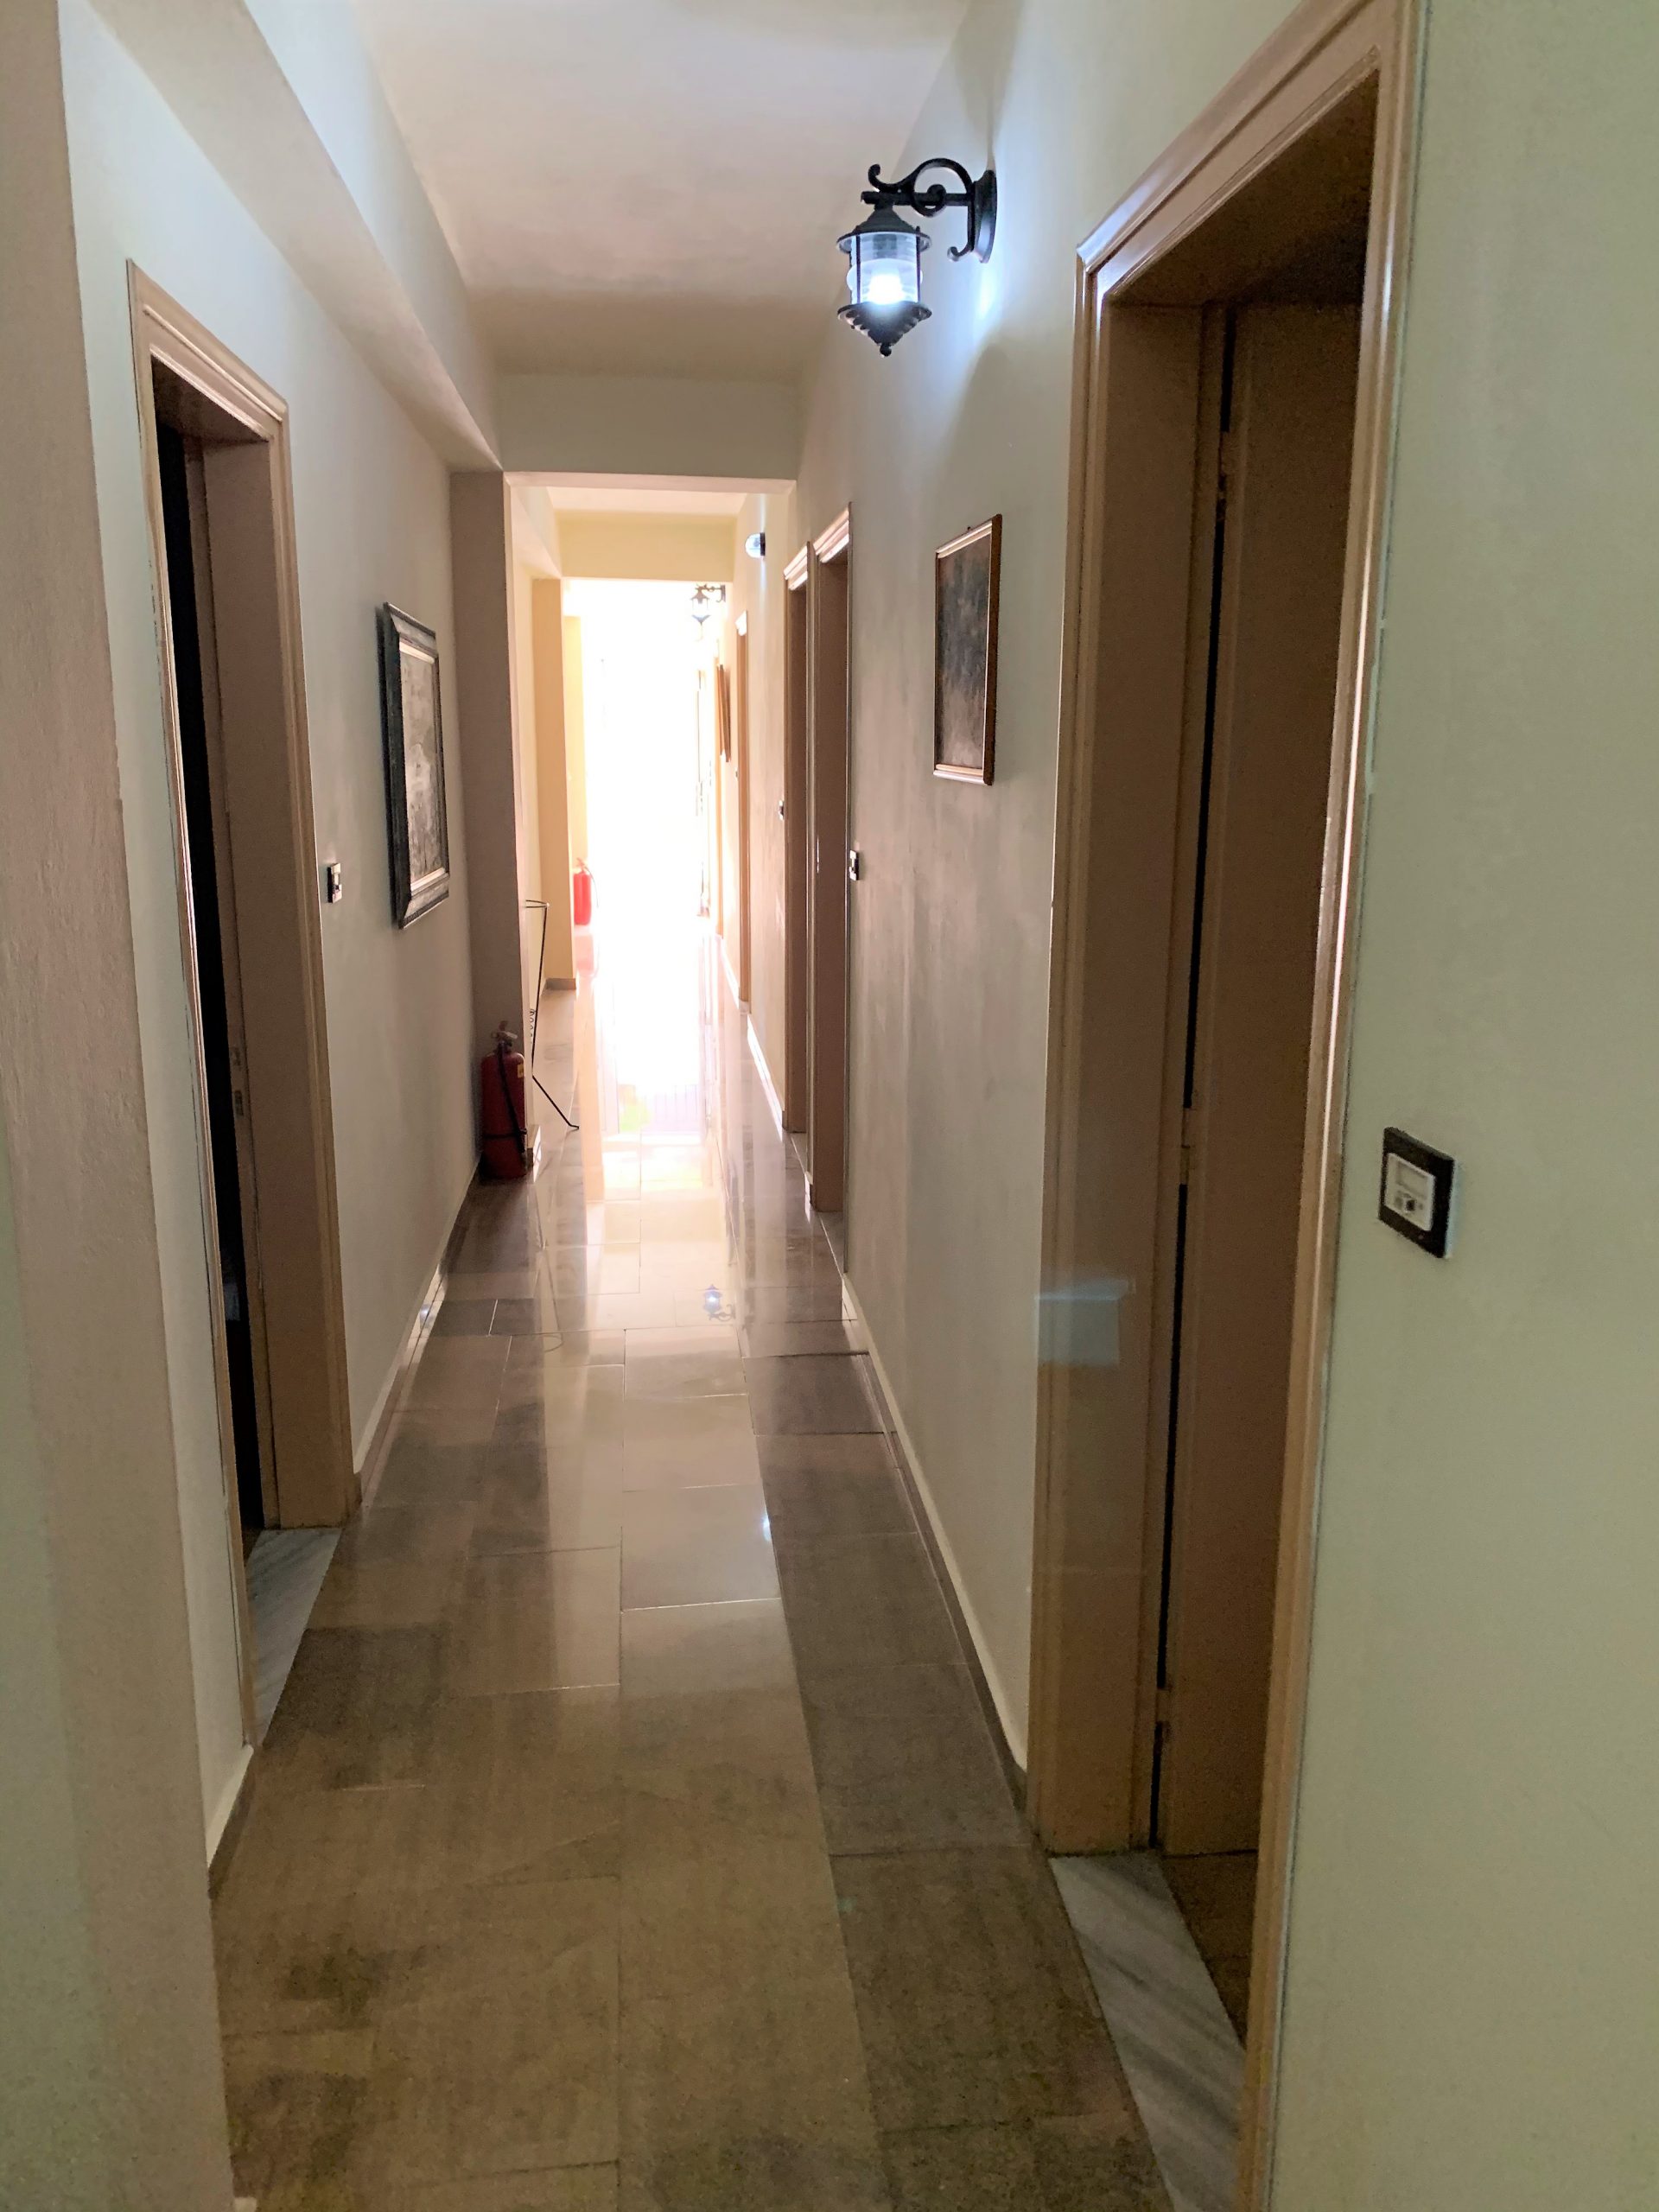 Hallway of apartment complex for sale Ithaca Greece, Vathi